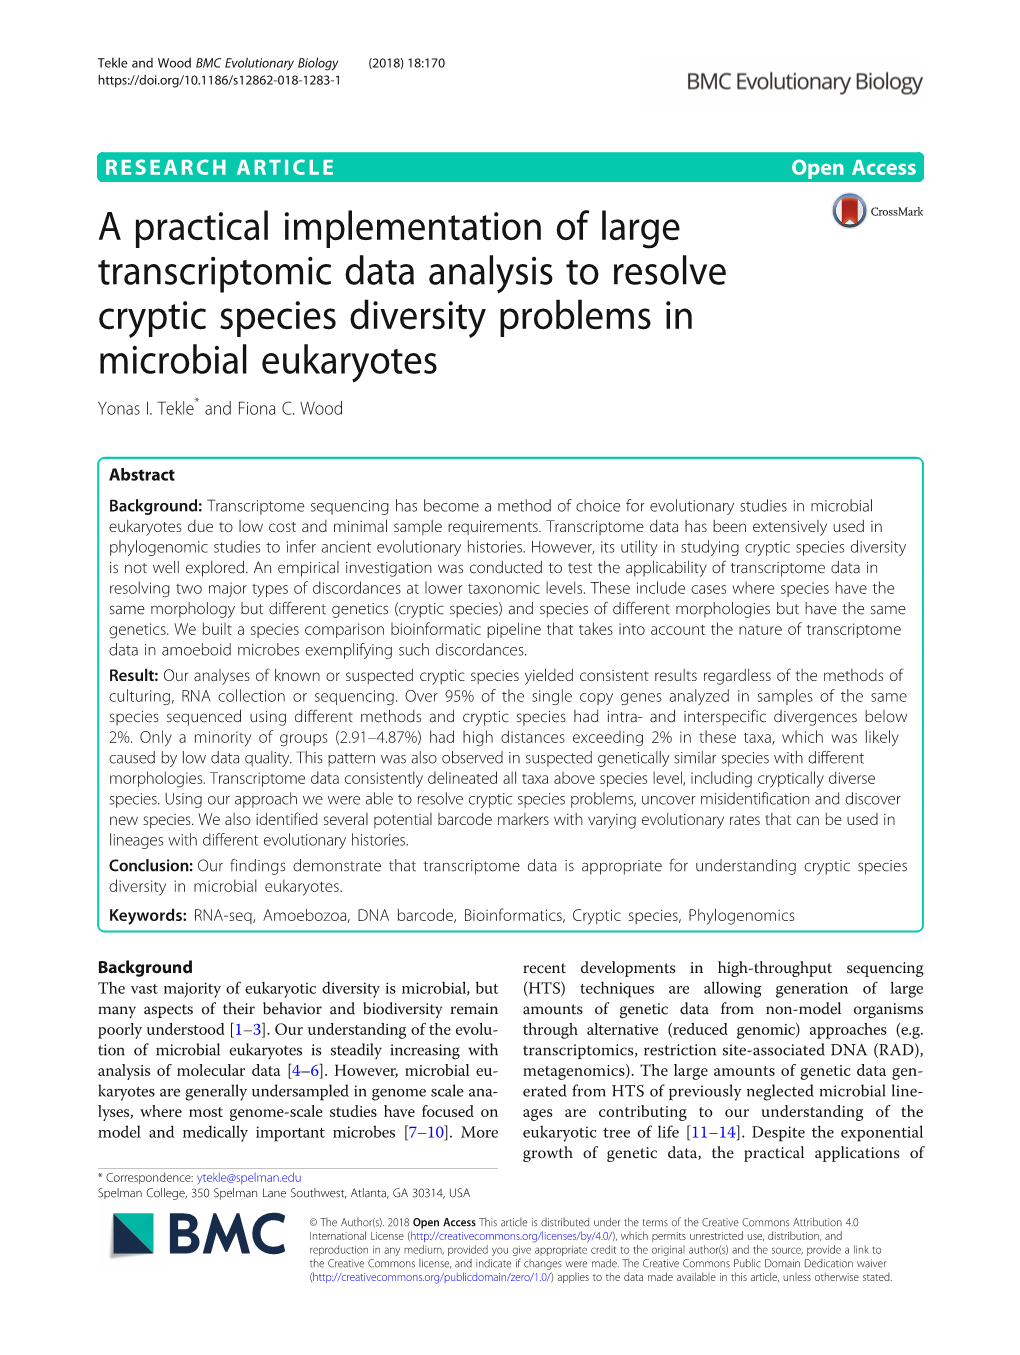 A Practical Implementation of Large Transcriptomic Data Analysis to Resolve Cryptic Species Diversity Problems in Microbial Eukaryotes Yonas I